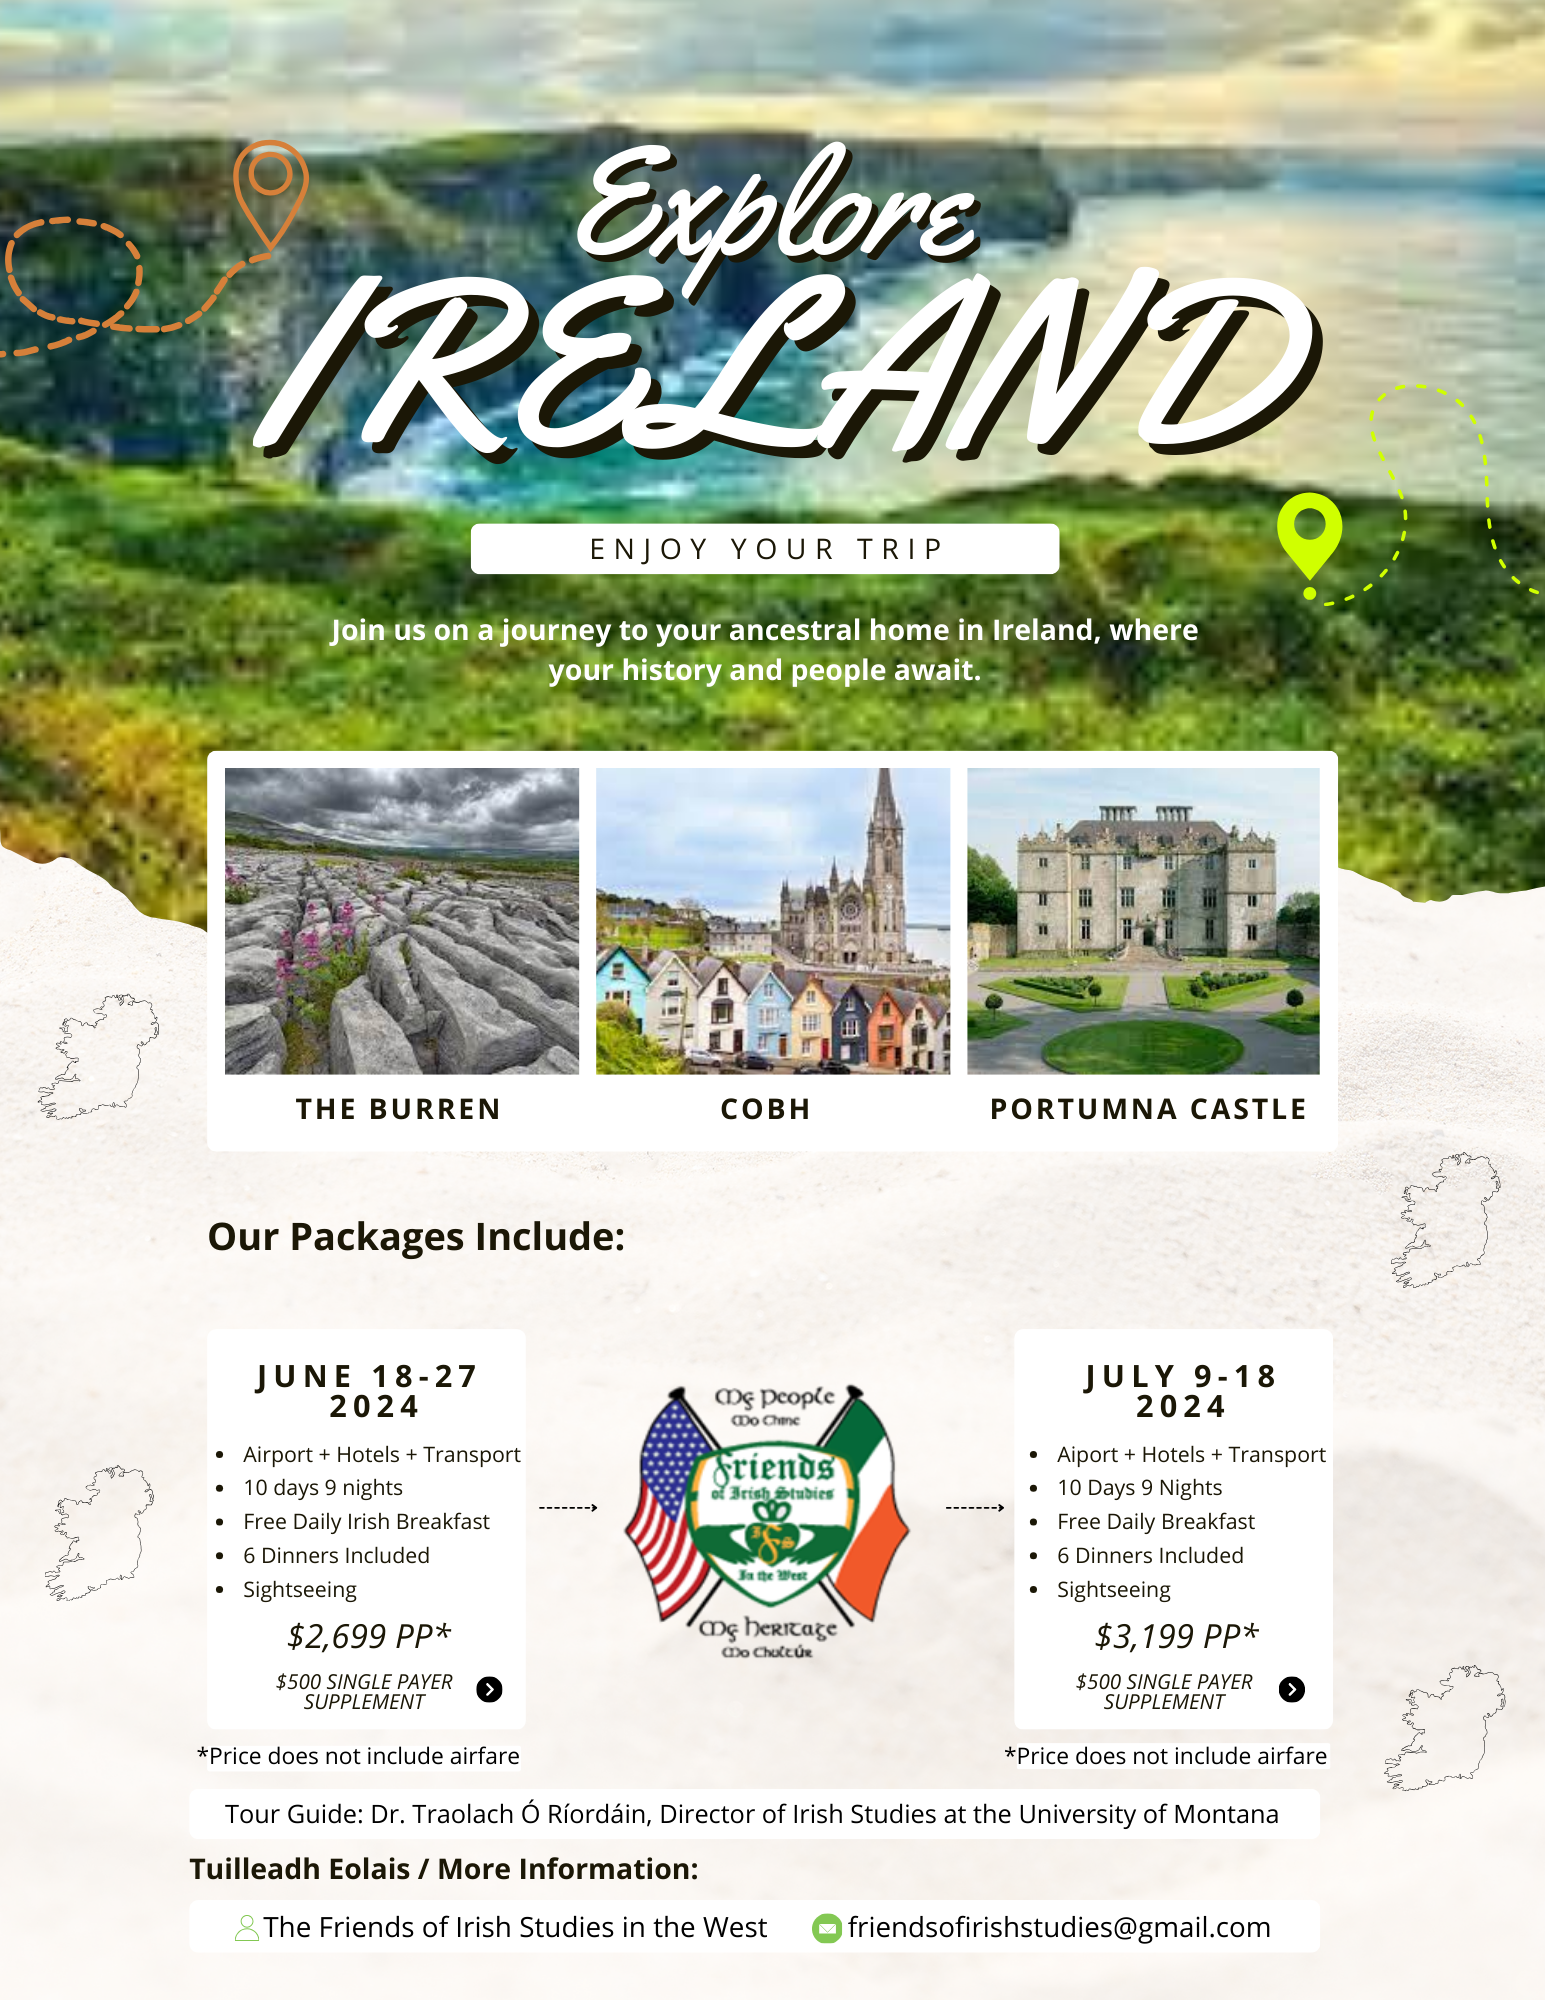 Tour Ireland with Friends of Irish Studies in the West